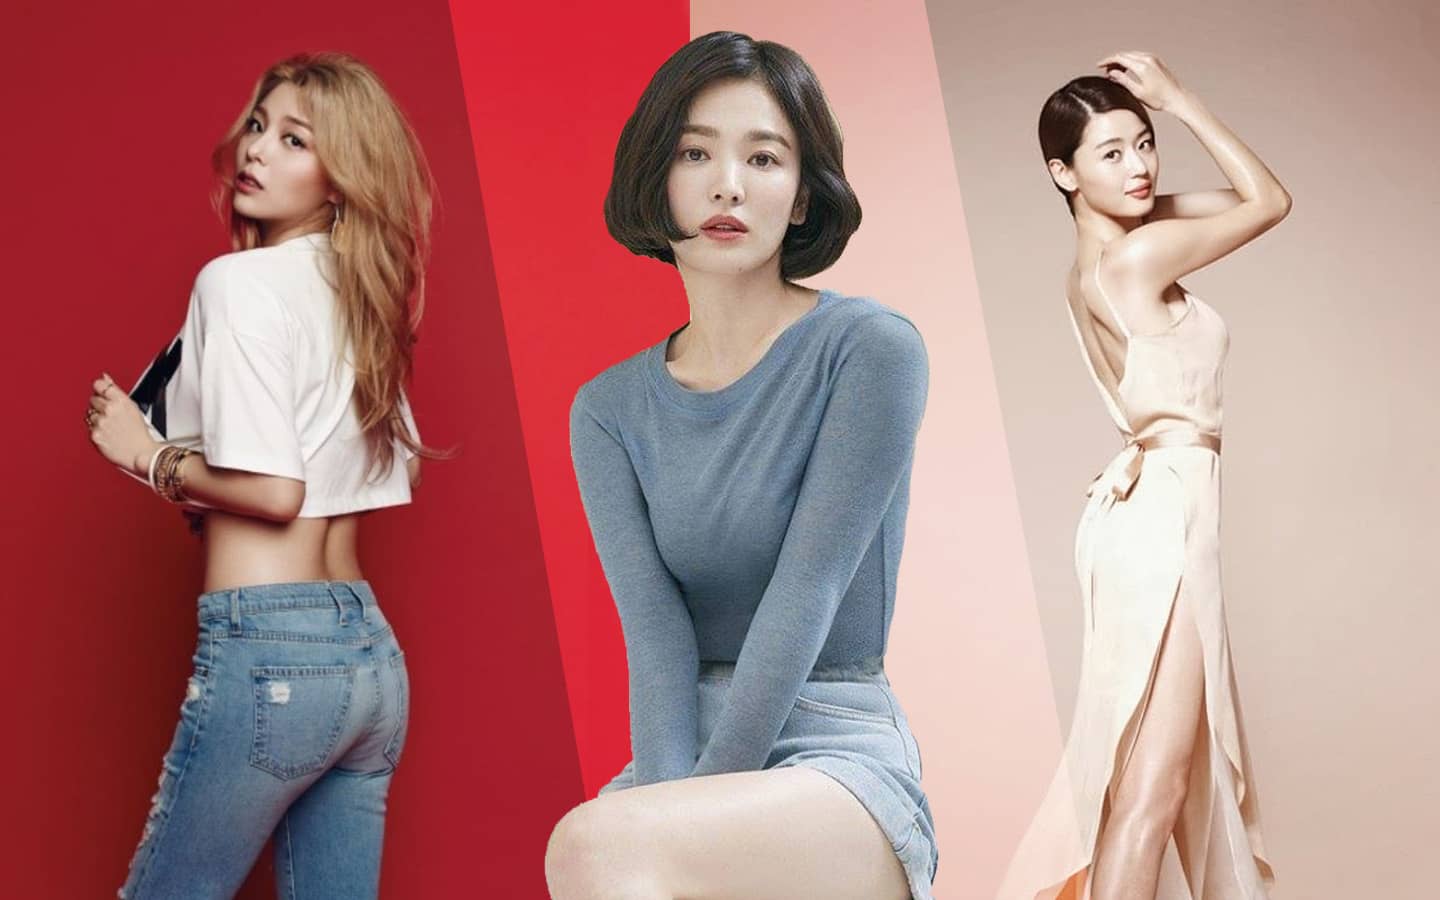 IN PHOTOS: Korean Actresses And K Pop Idols Reveal Their Workout And Diet Secrets